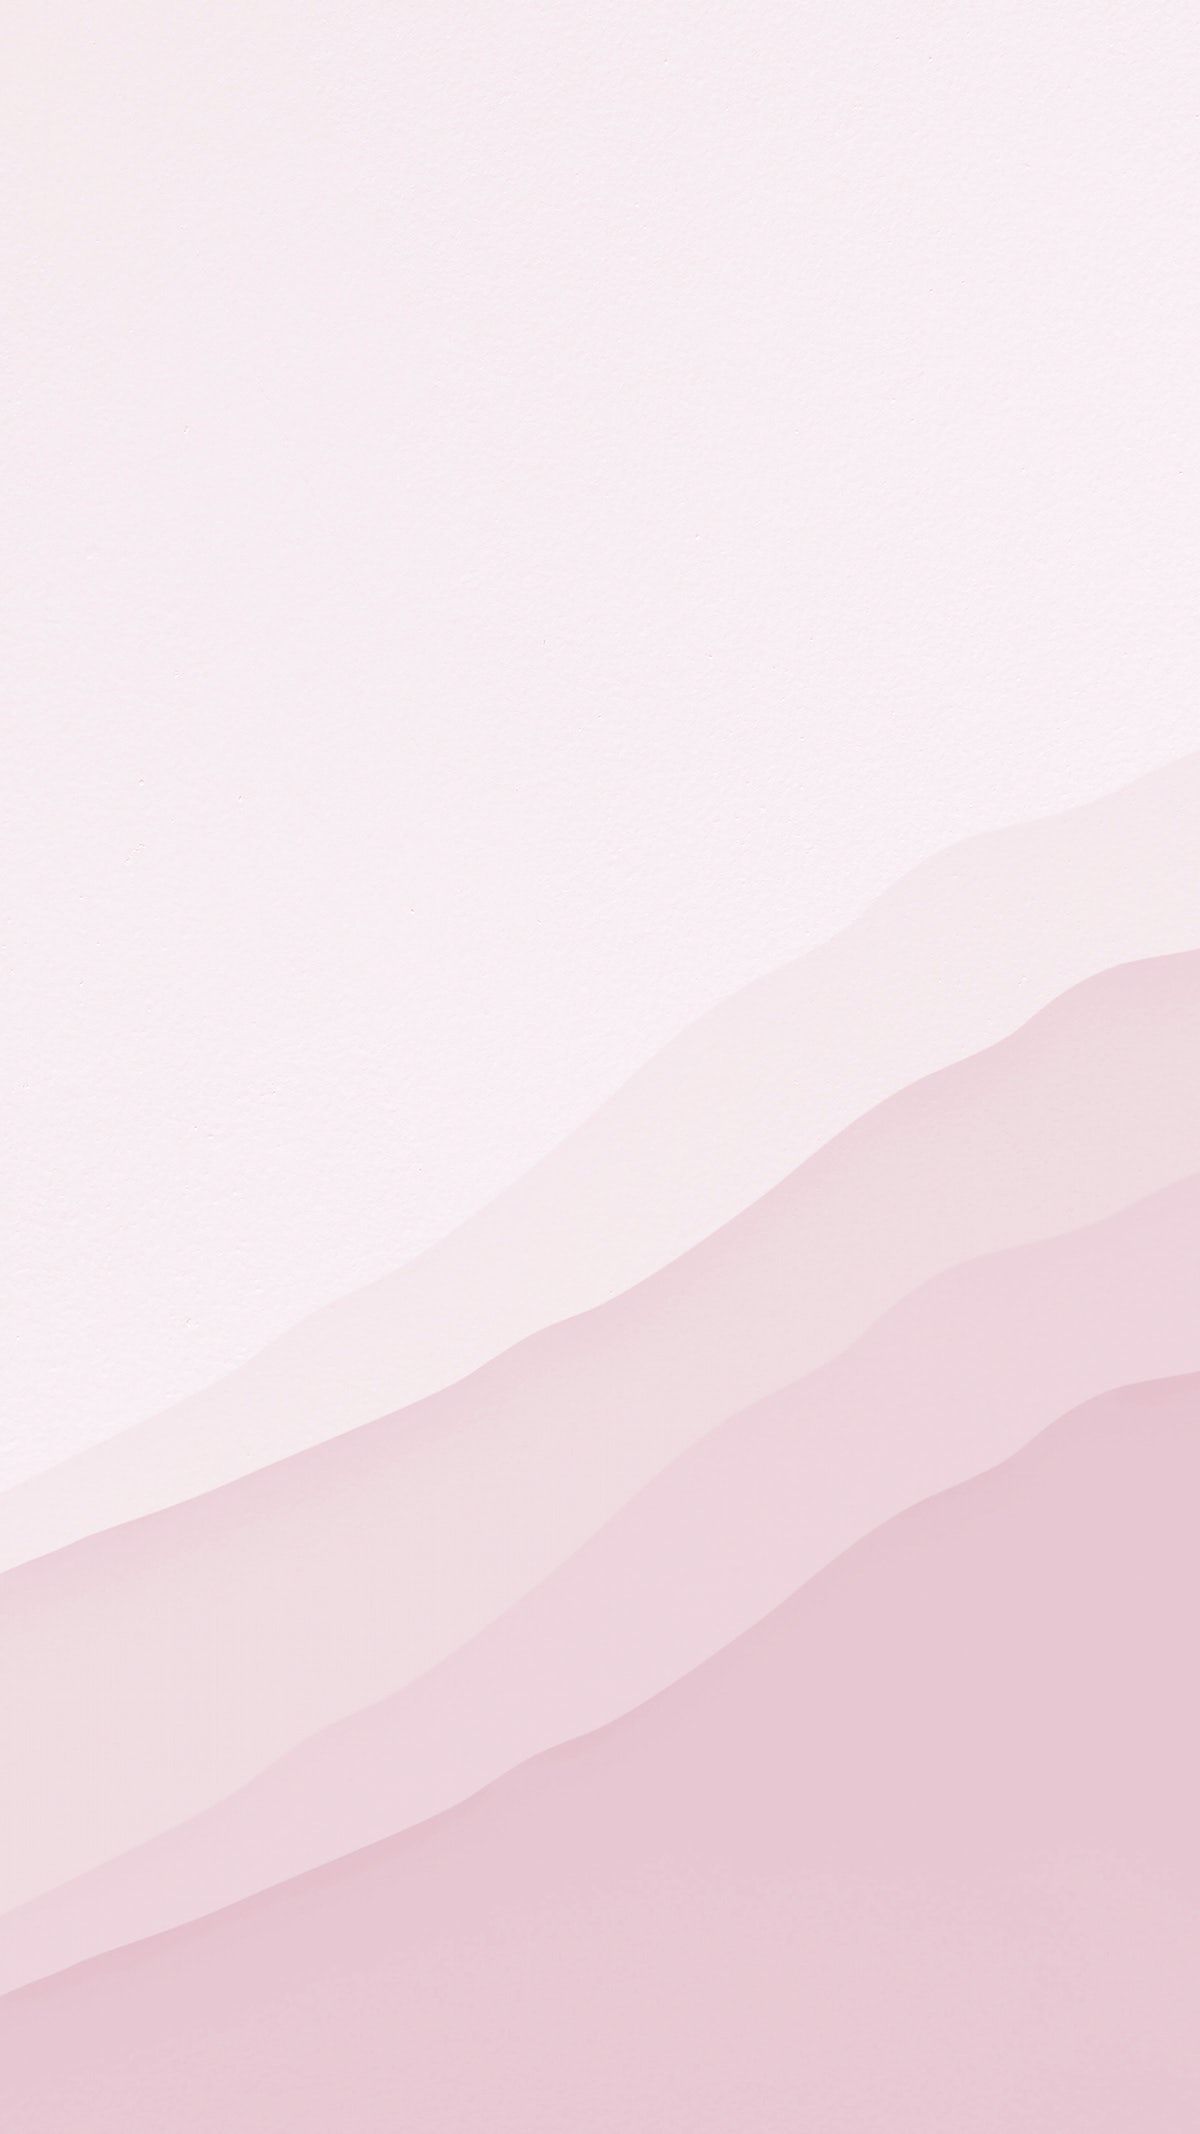 A pink and white background with some mountains - Soft pink, blush